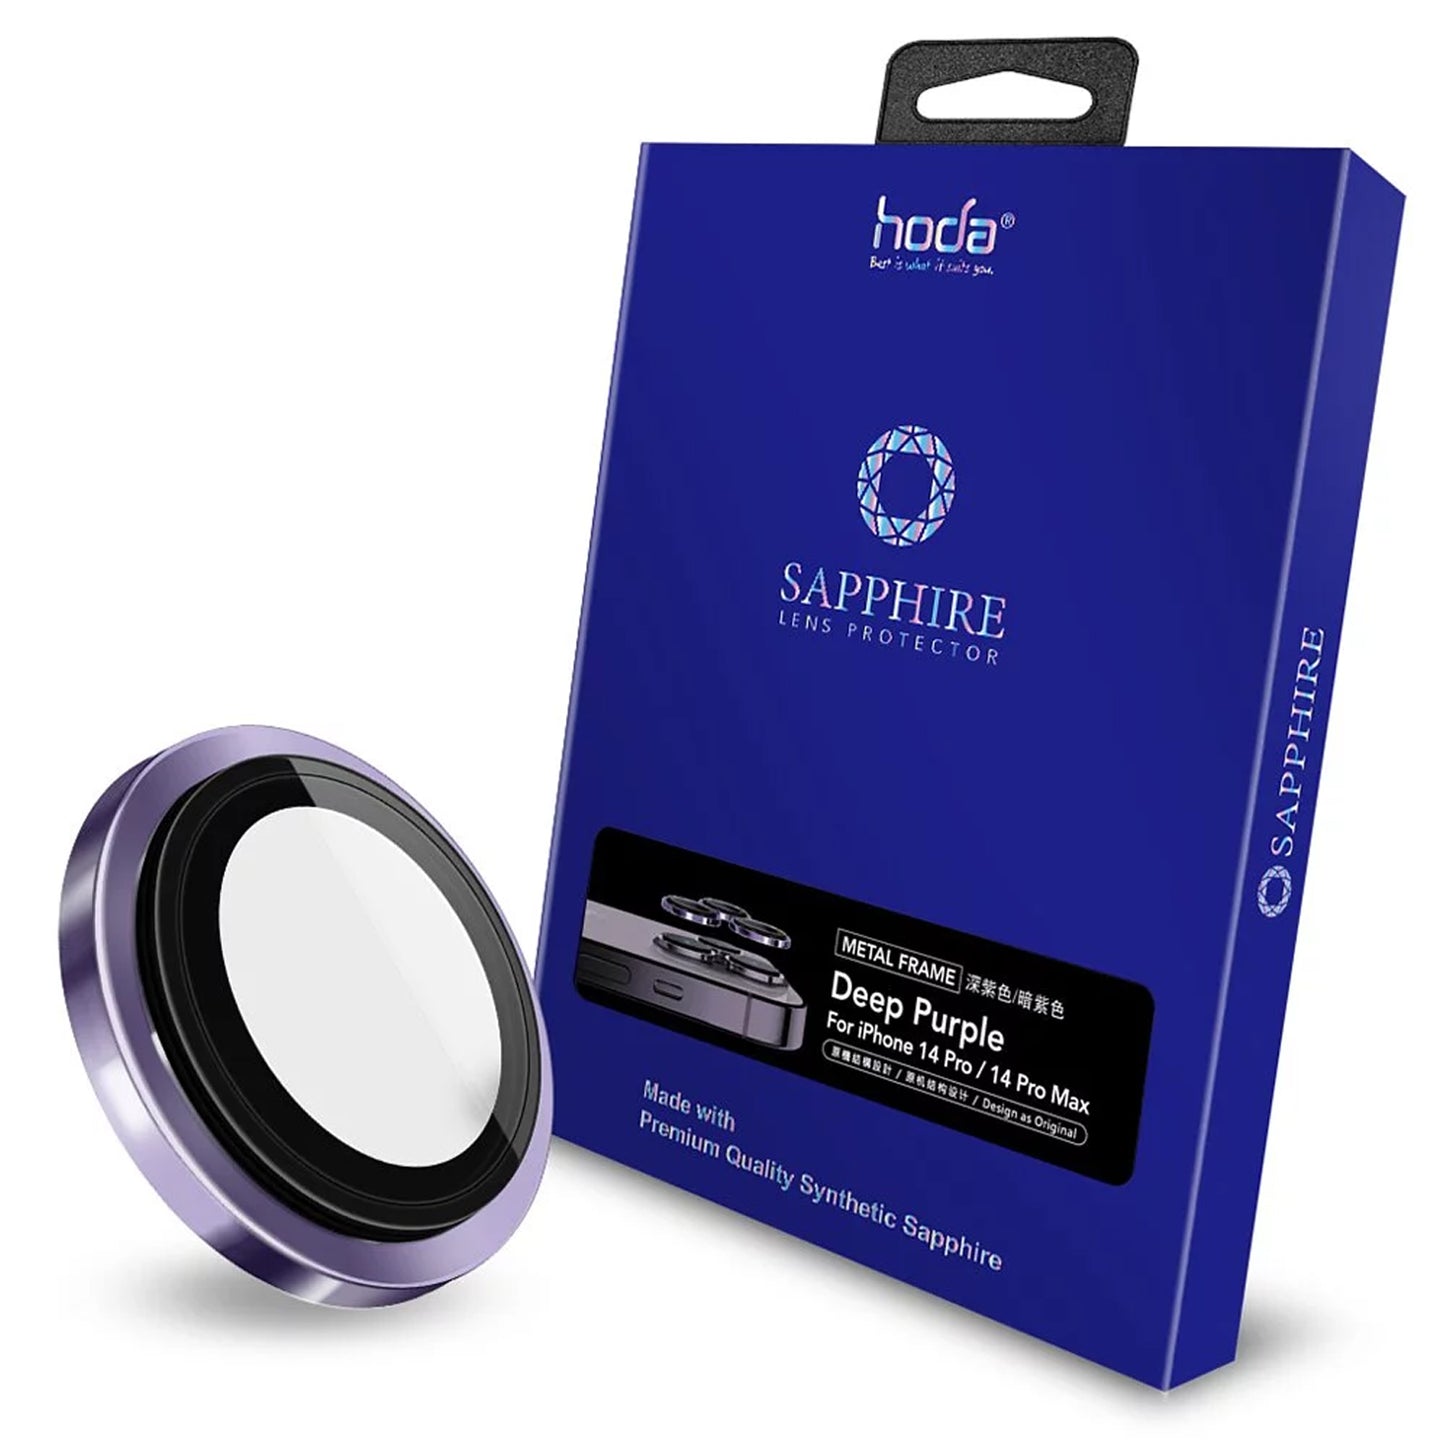 Hoda Sapphire Lens Protector for iPhone 14 Pro - 14 Pro Max - Purple (3pcs) (Barcode: 4711103546635 )